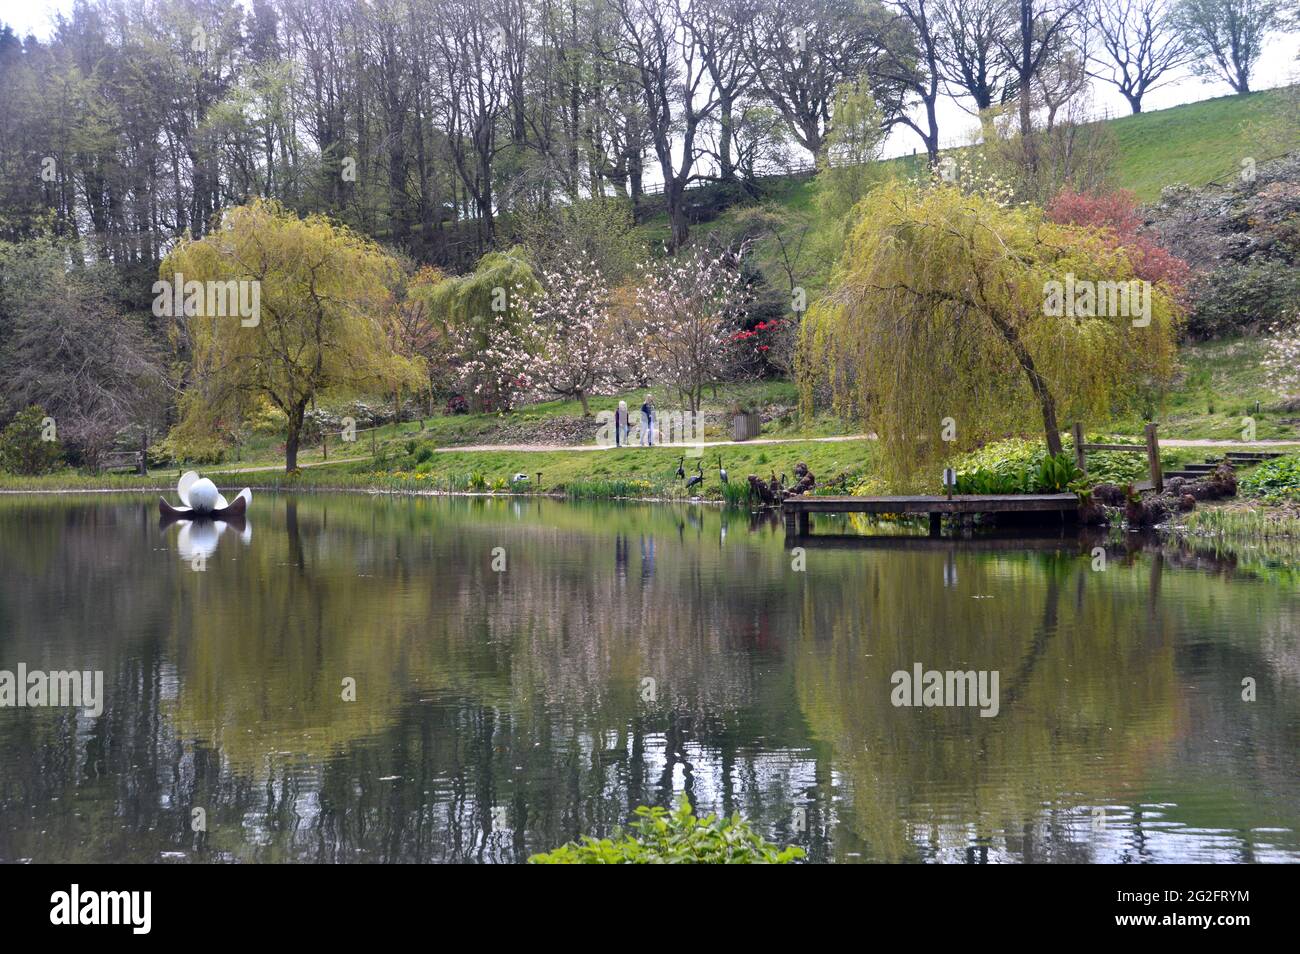 Couple Walking by Floating Lily Sculpture Reflected in the Magnolia Lake, Himalayan Garden & Sculpture Park, Grewelthorpe, Ripon, North Yorkshire, UK. Stock Photo